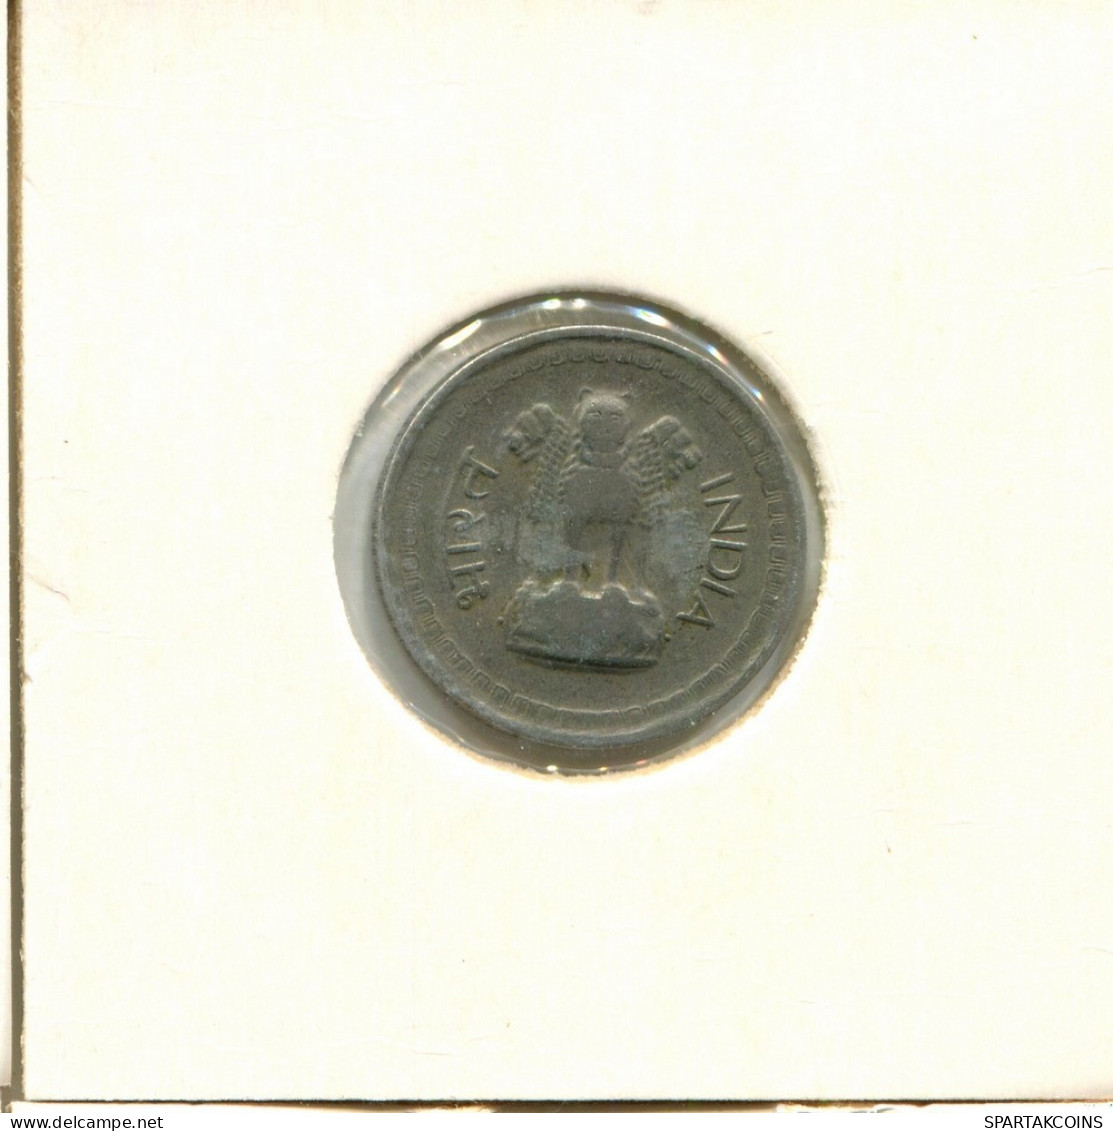 25 PAISE 1973 INDIEN INDIA Münze #AY769.D.A - India